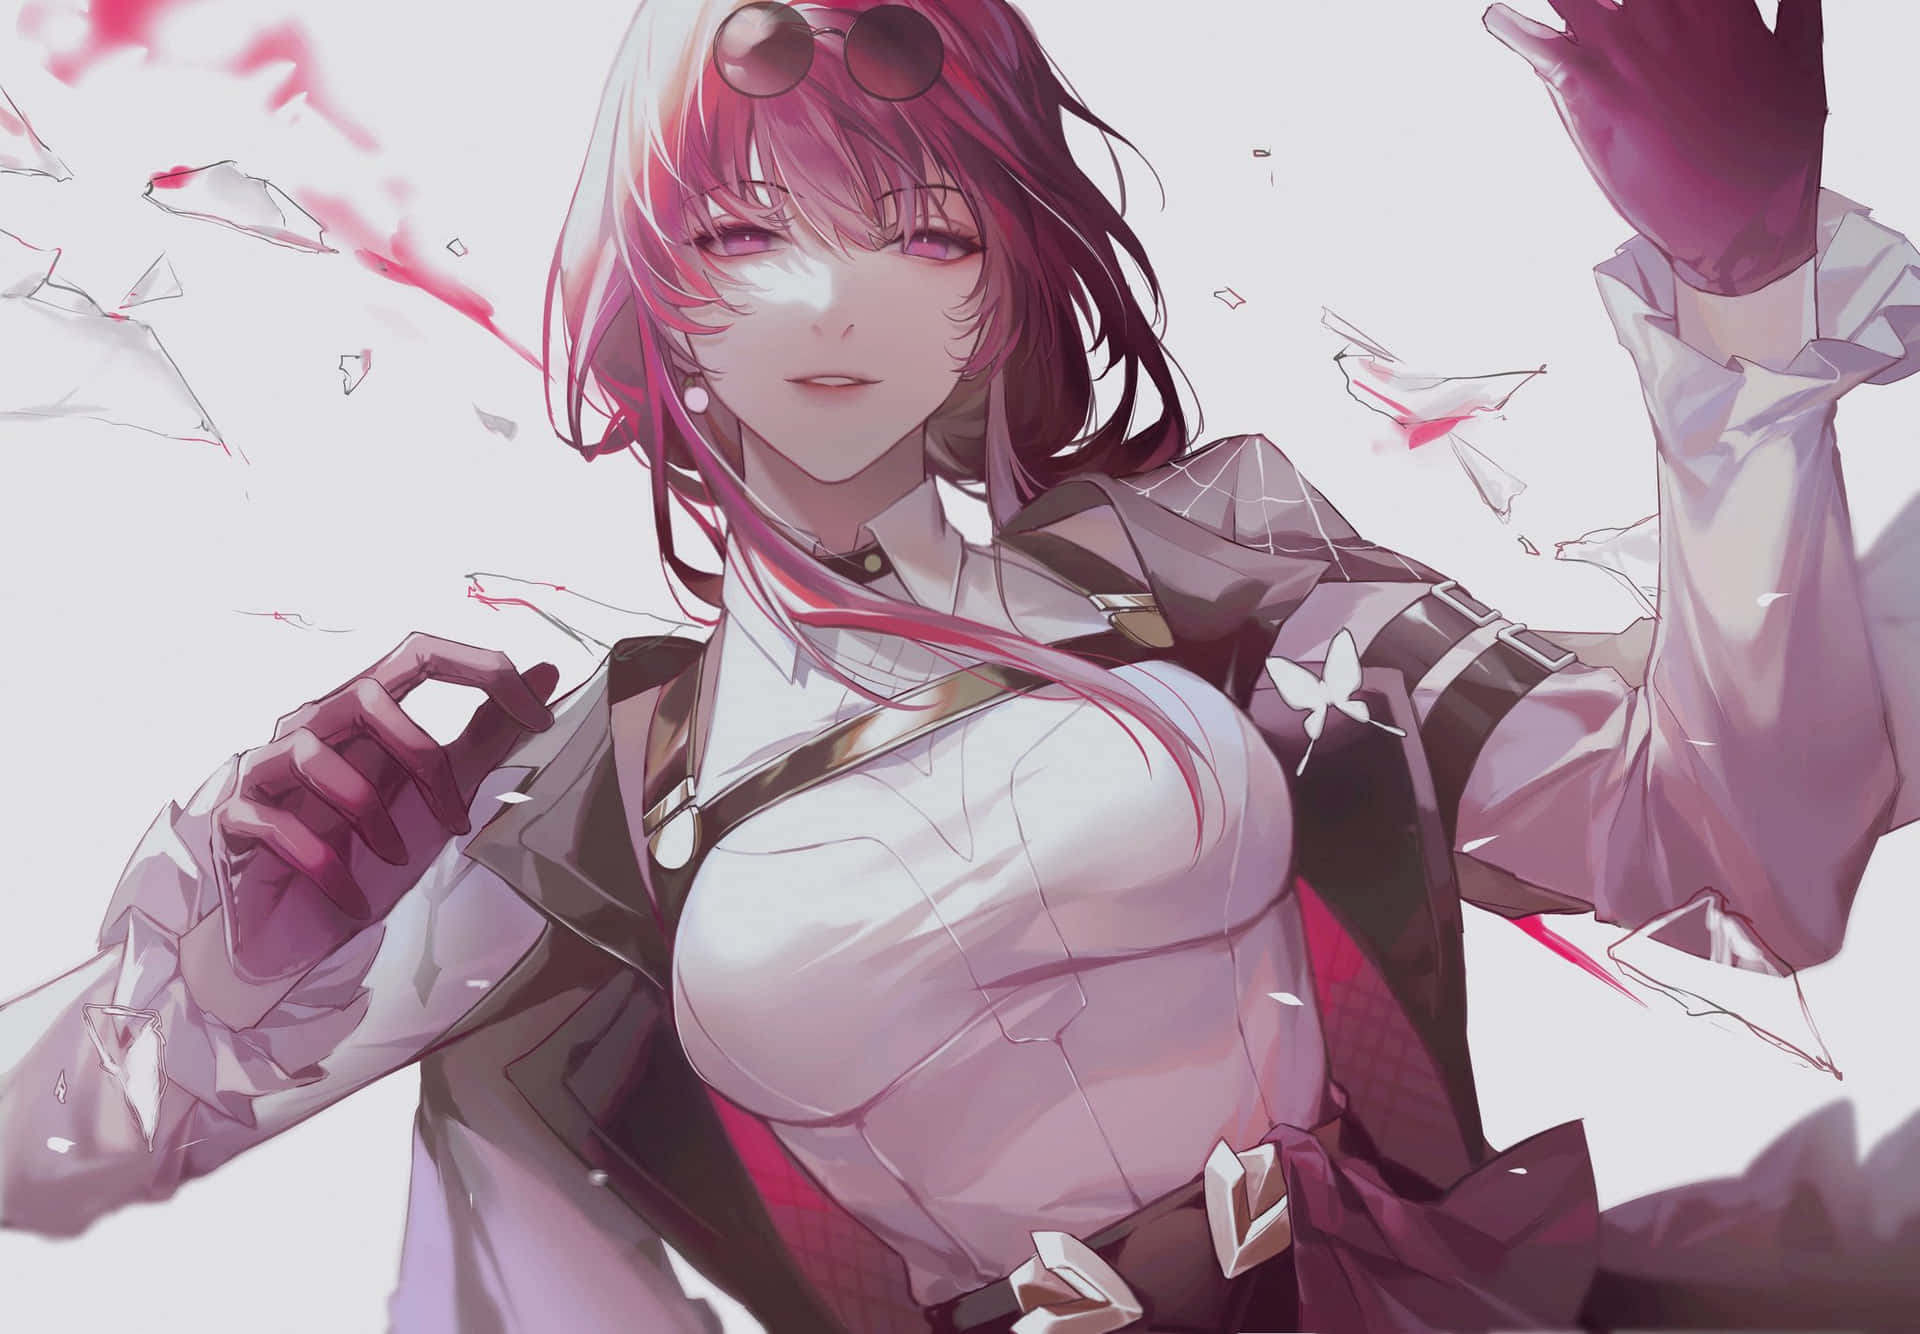 Anime Style Female Character Shattered Glass Effect Wallpaper